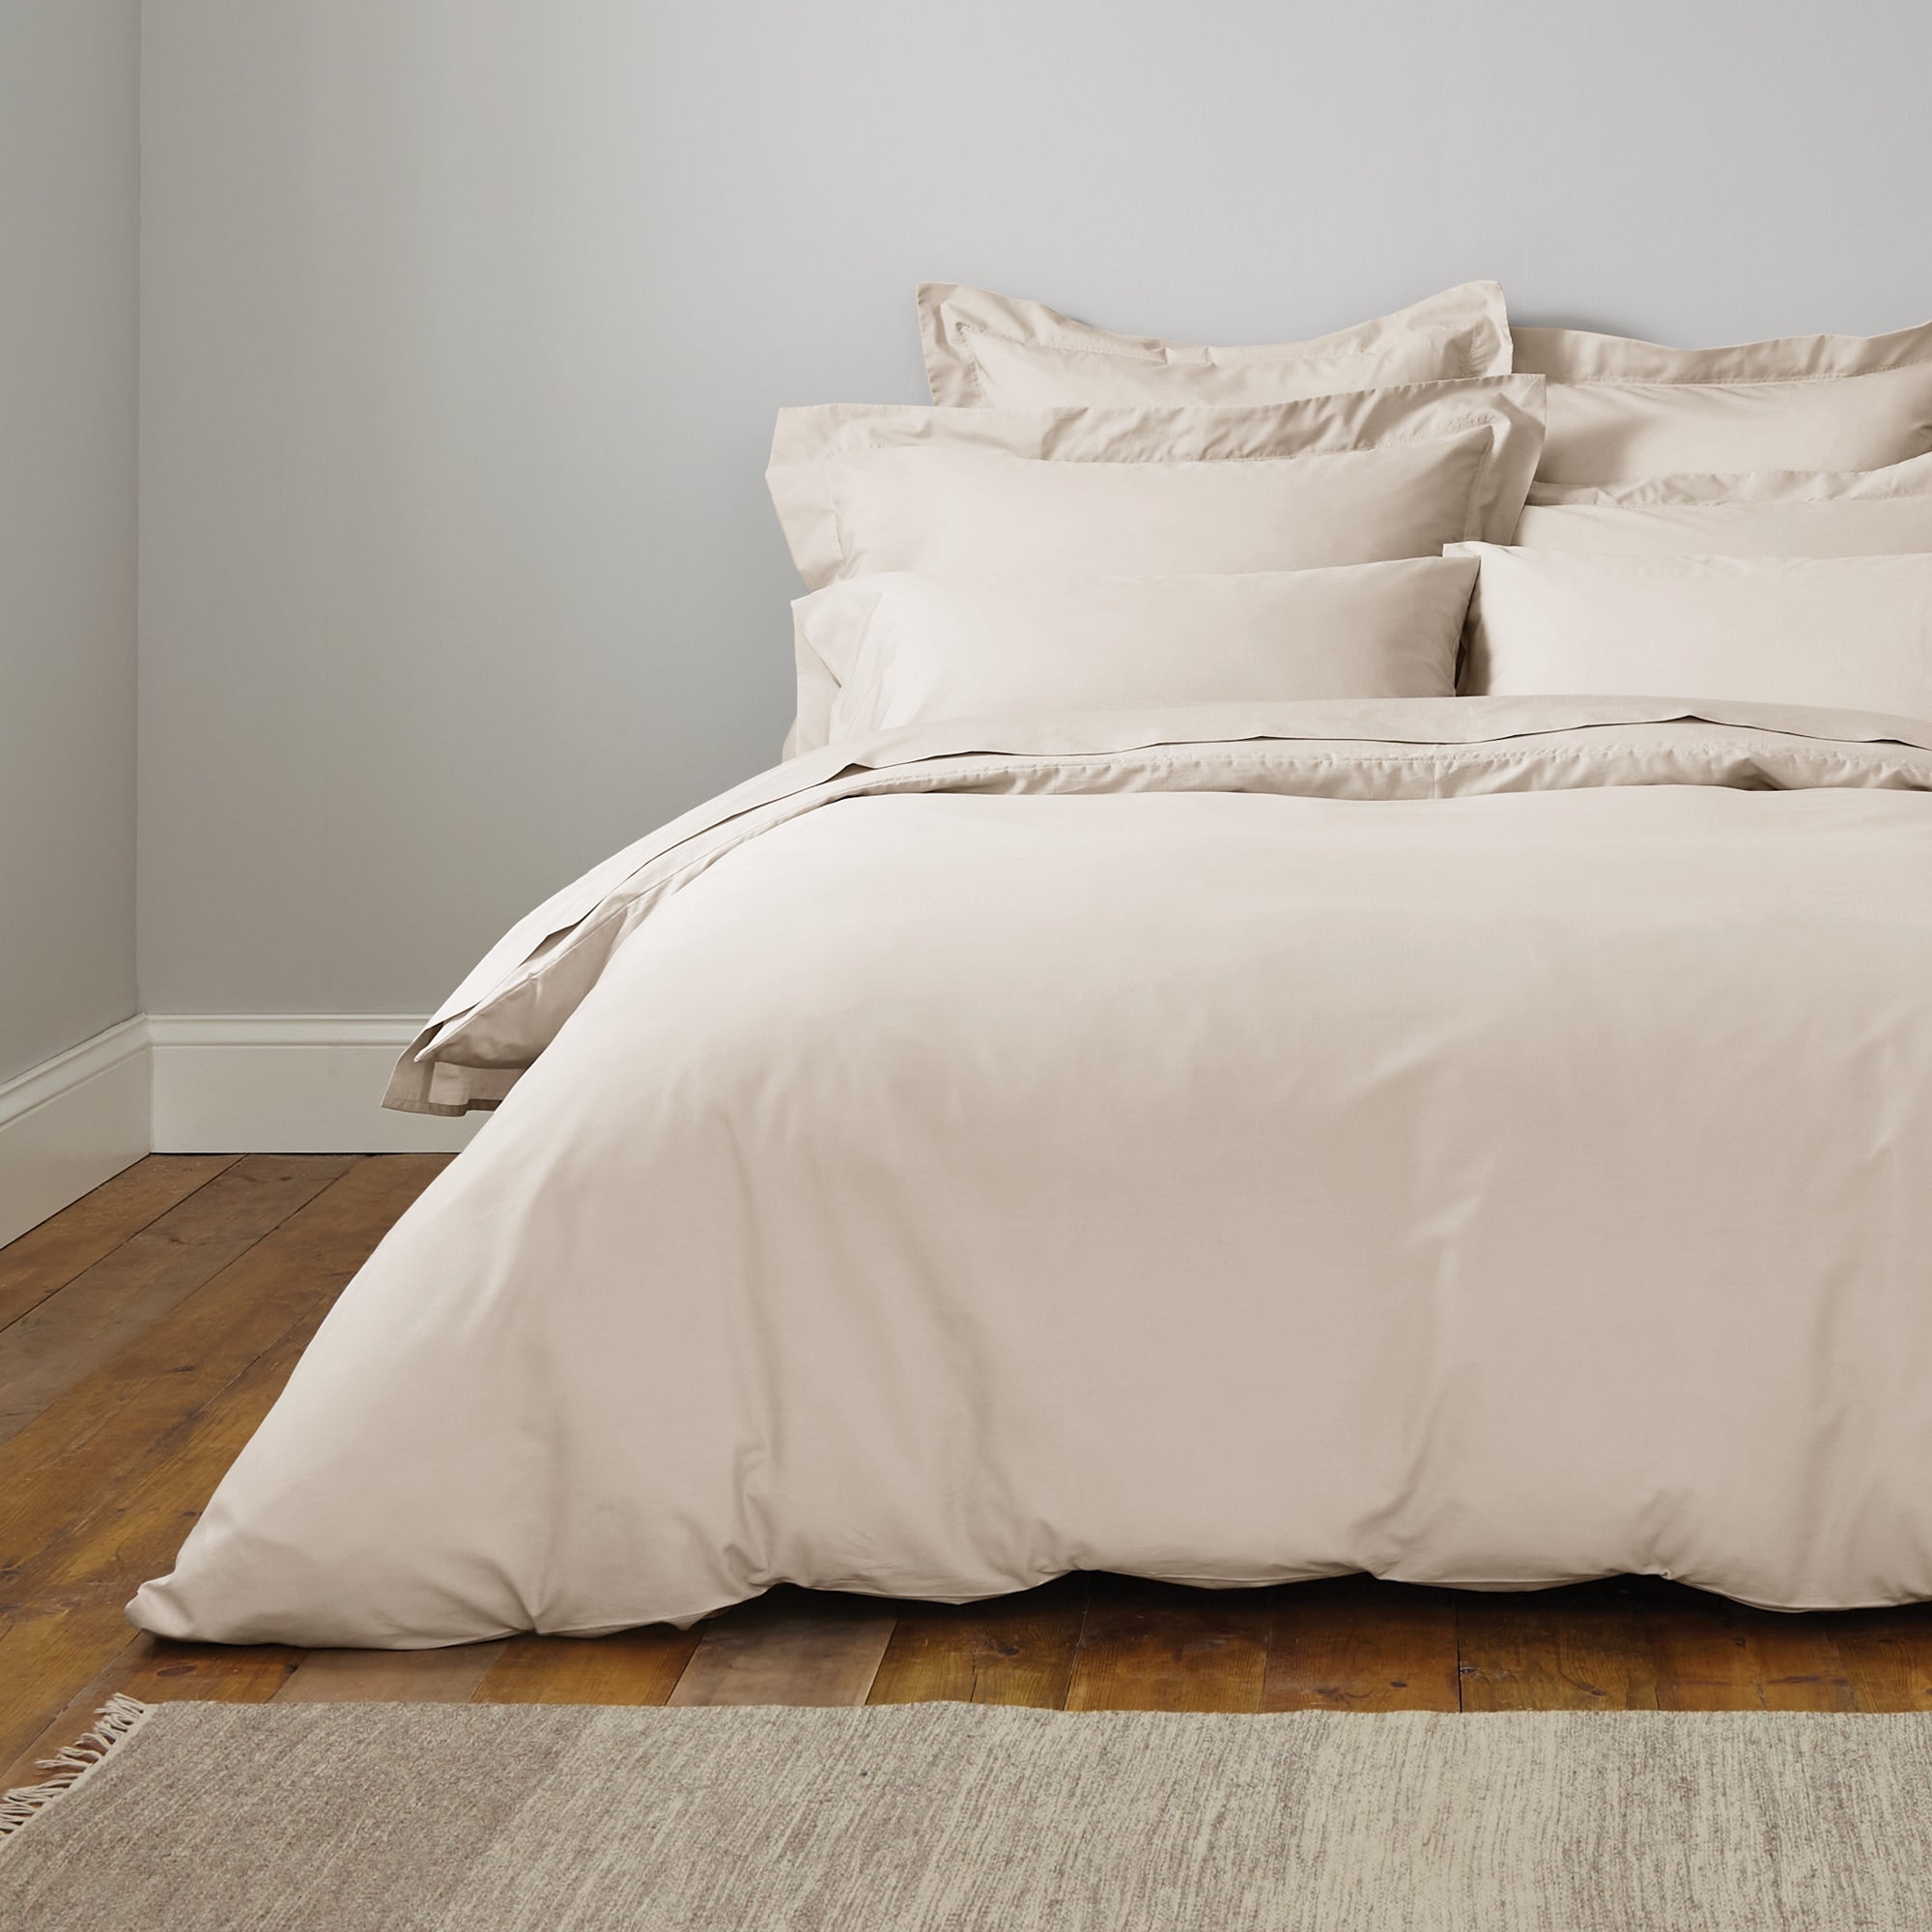 Image of Fogarty Cooling Cotton White Sands Duvet Cover Brown